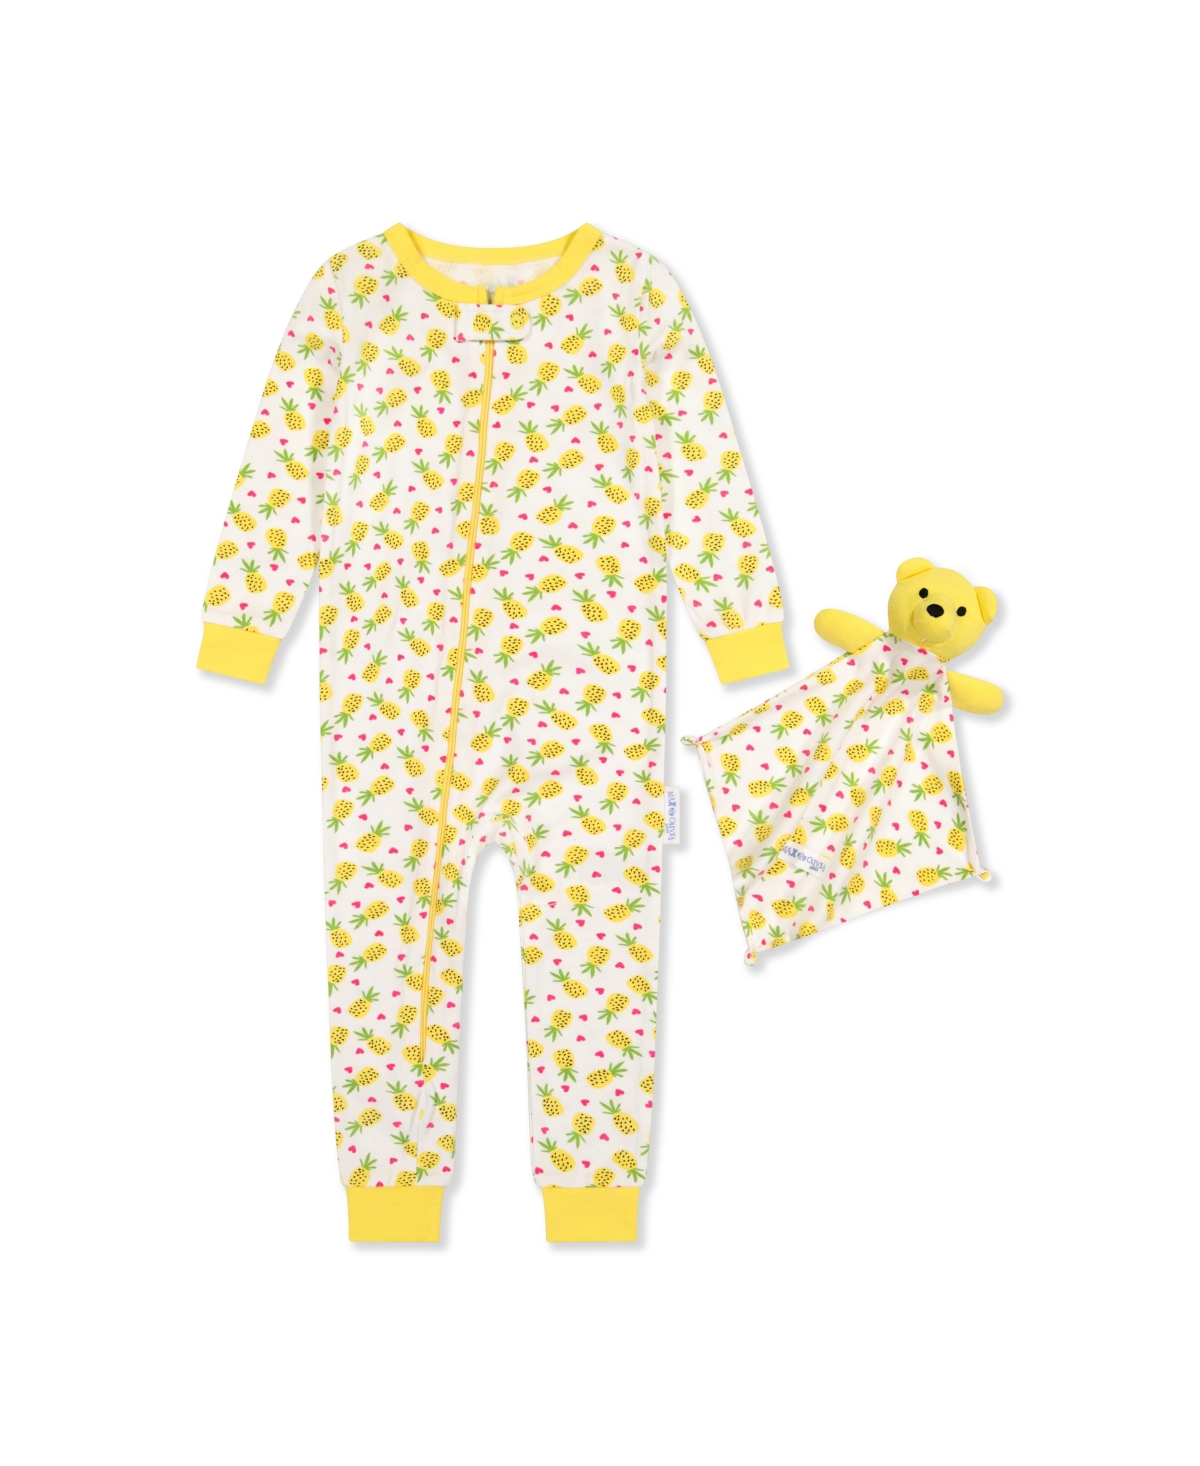 Max & Olivia Baby Girls 1 Piece Snug Fit Pajama With Matching Blankie Baby In Yellow